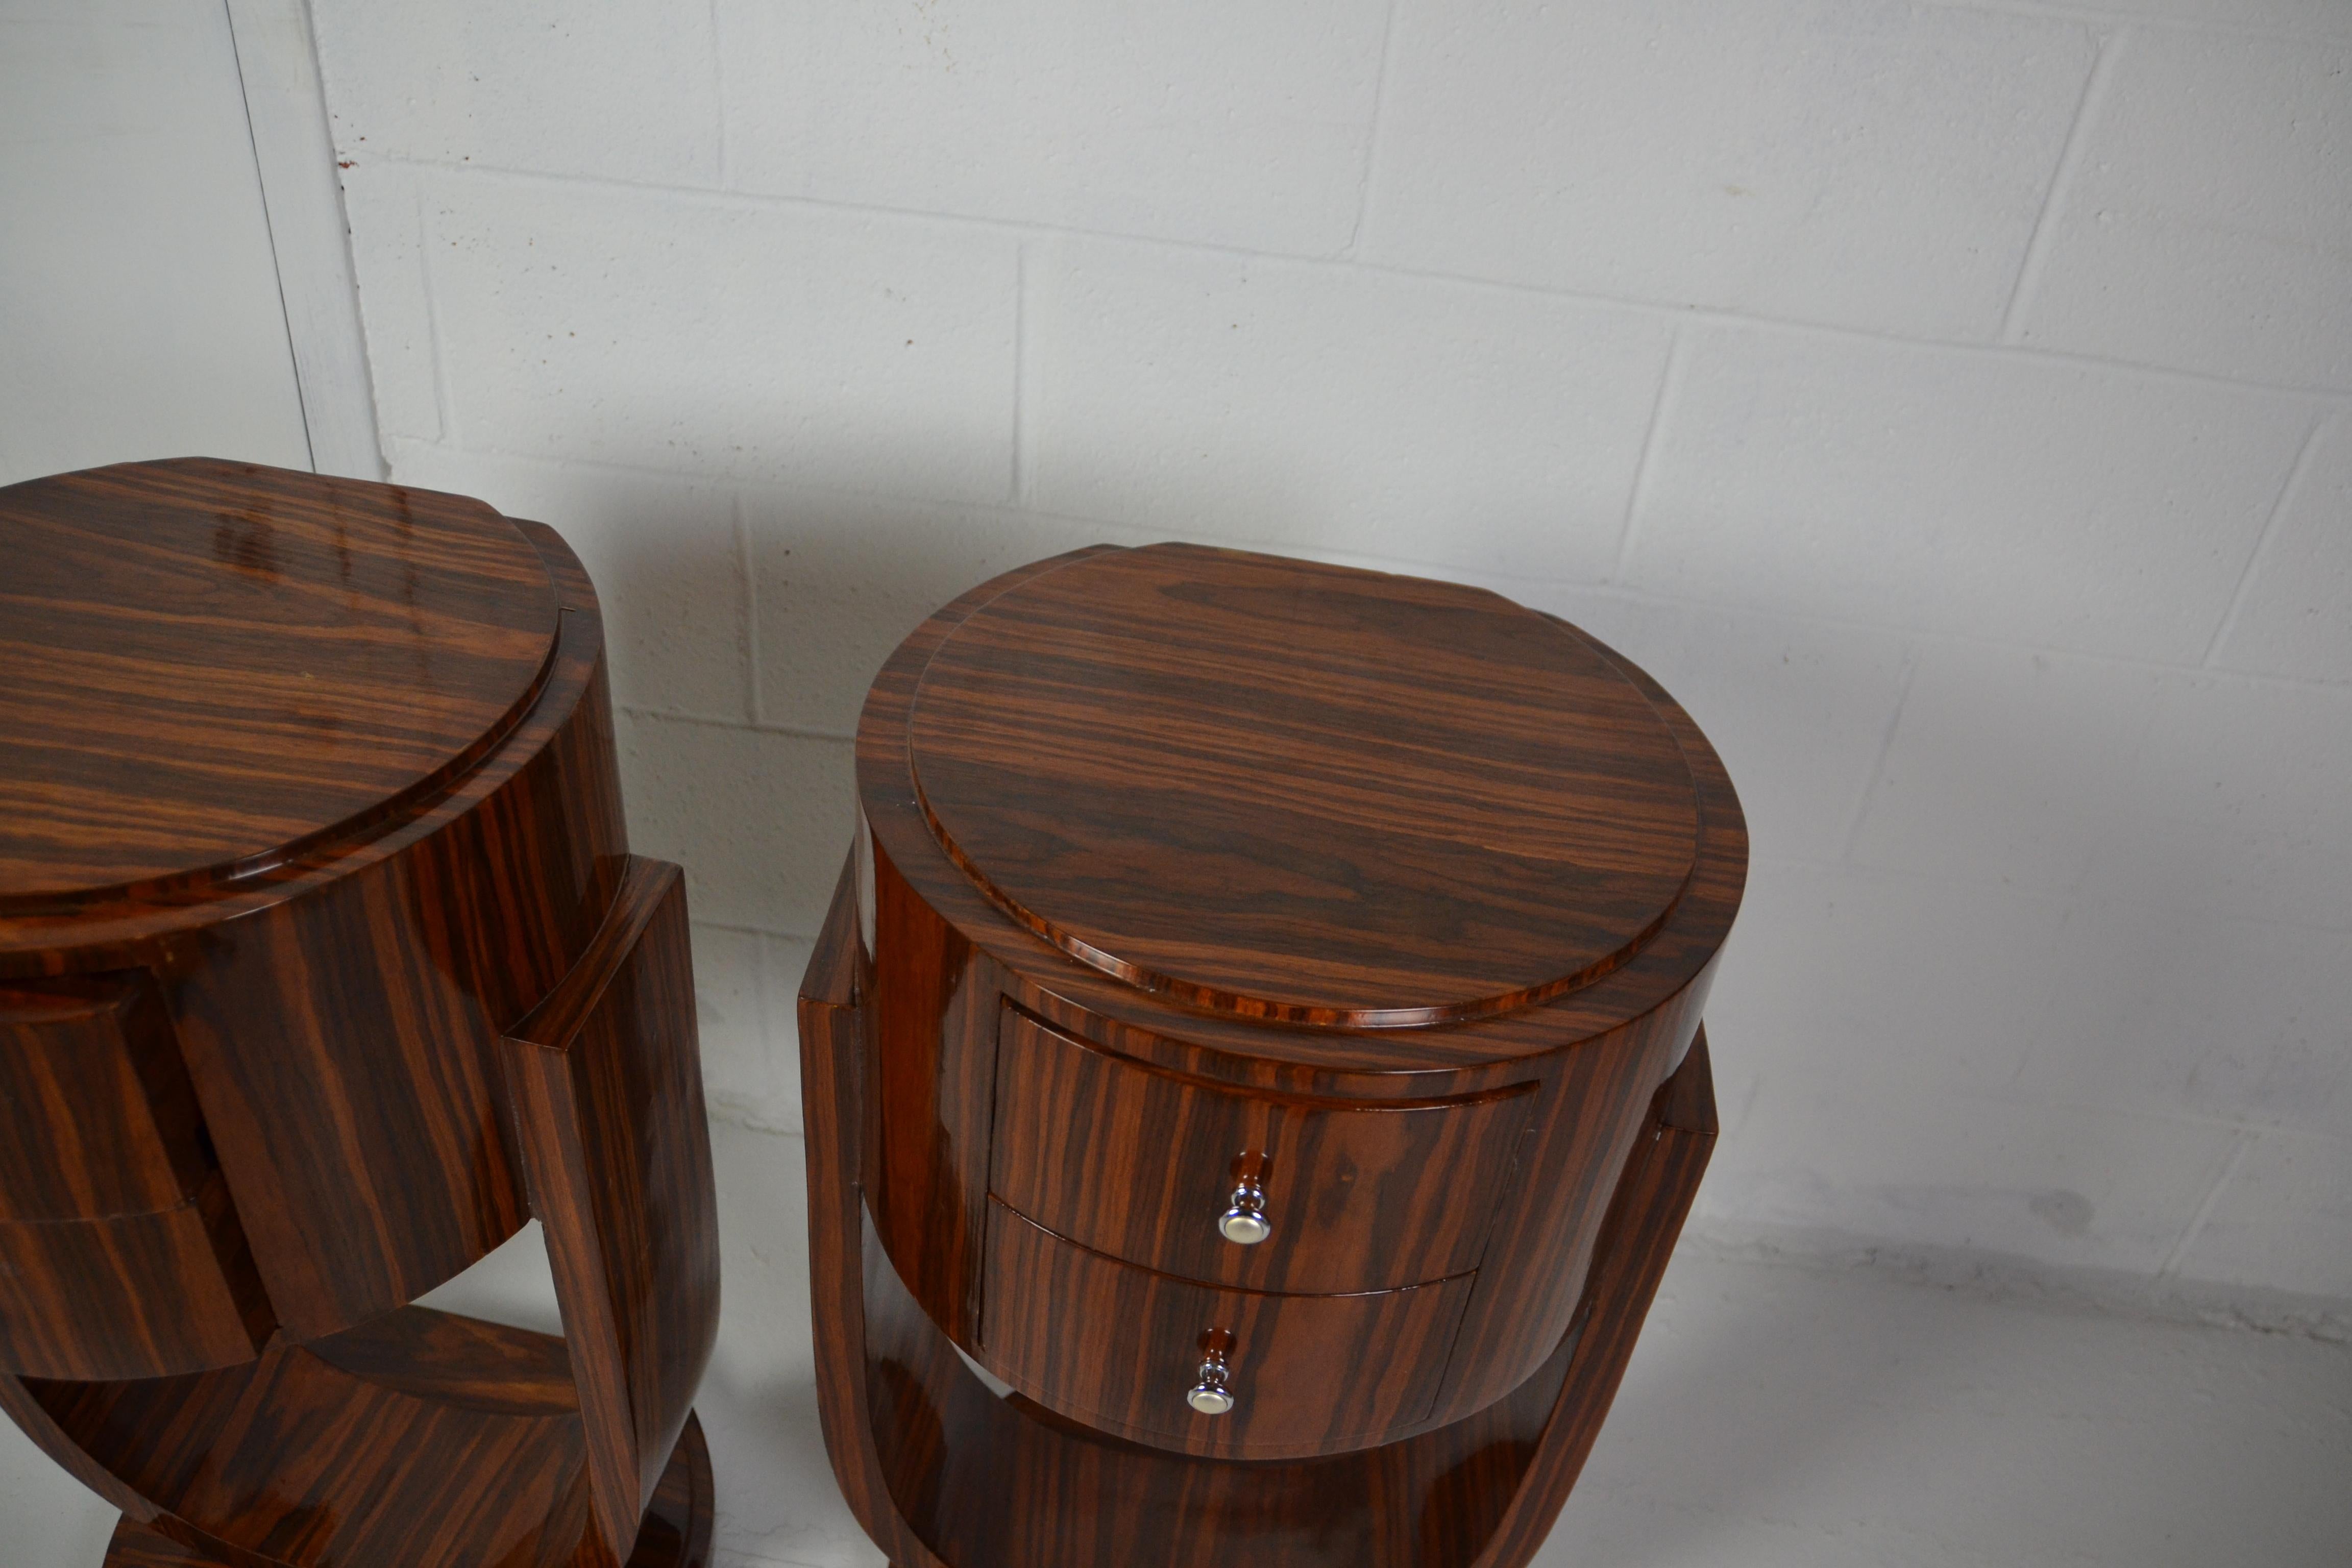 Pair of two drawers rosewood Art Deco style nightstands or end tables.